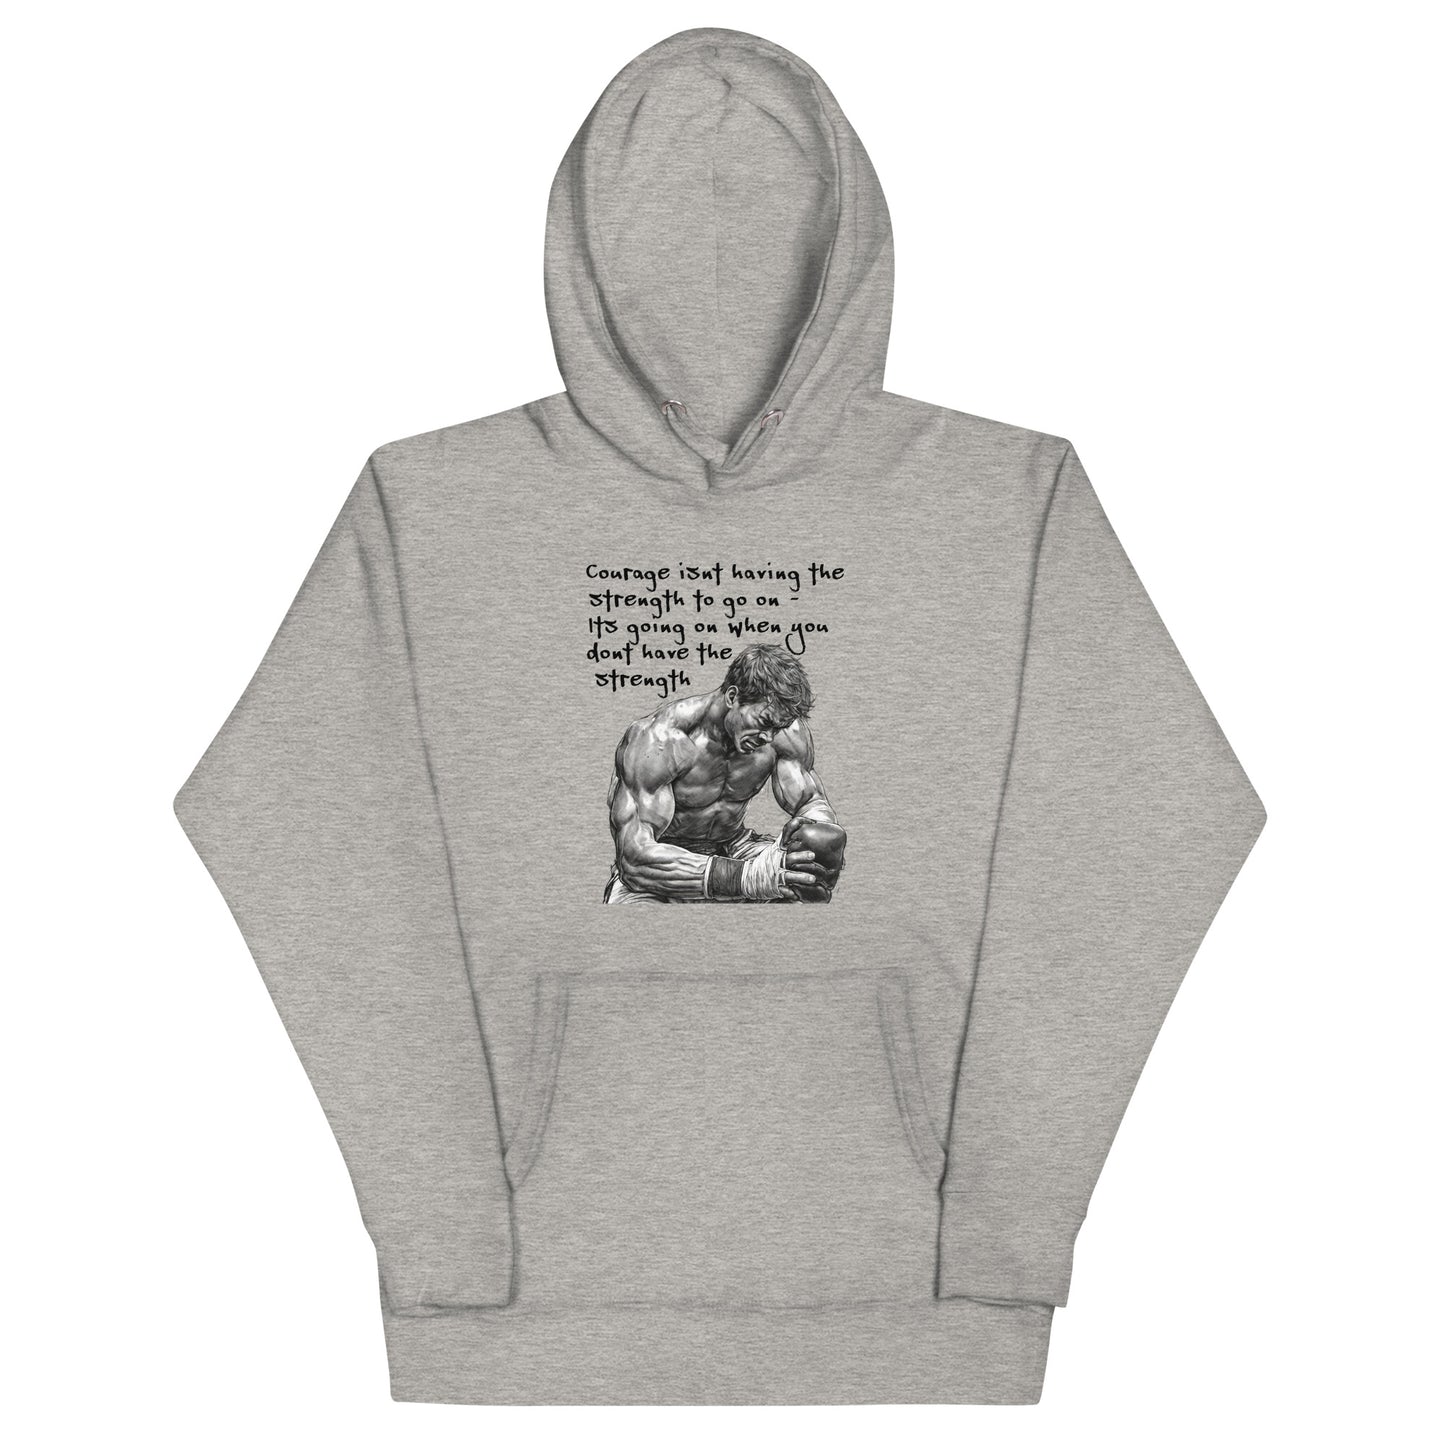 Courage and Strength Men's Hoodie Carbon Grey